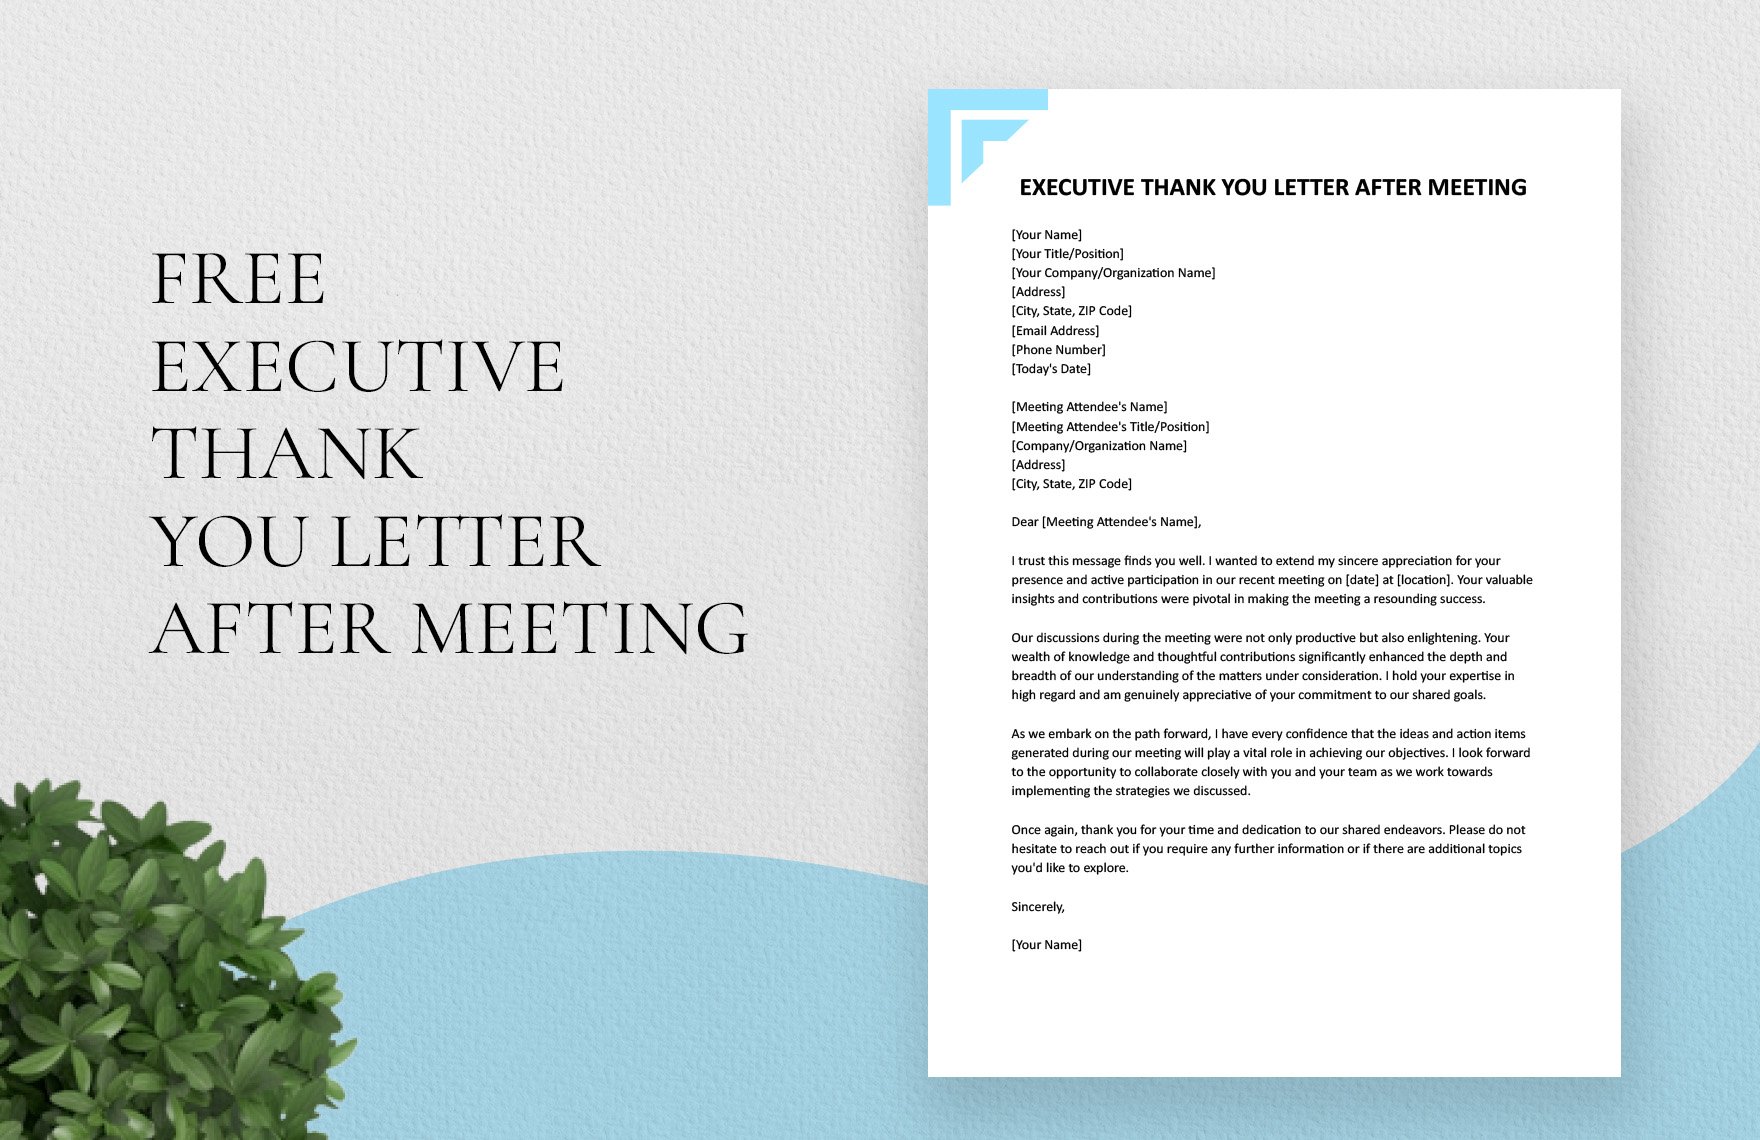 Executive Thank You Letter After Meeting